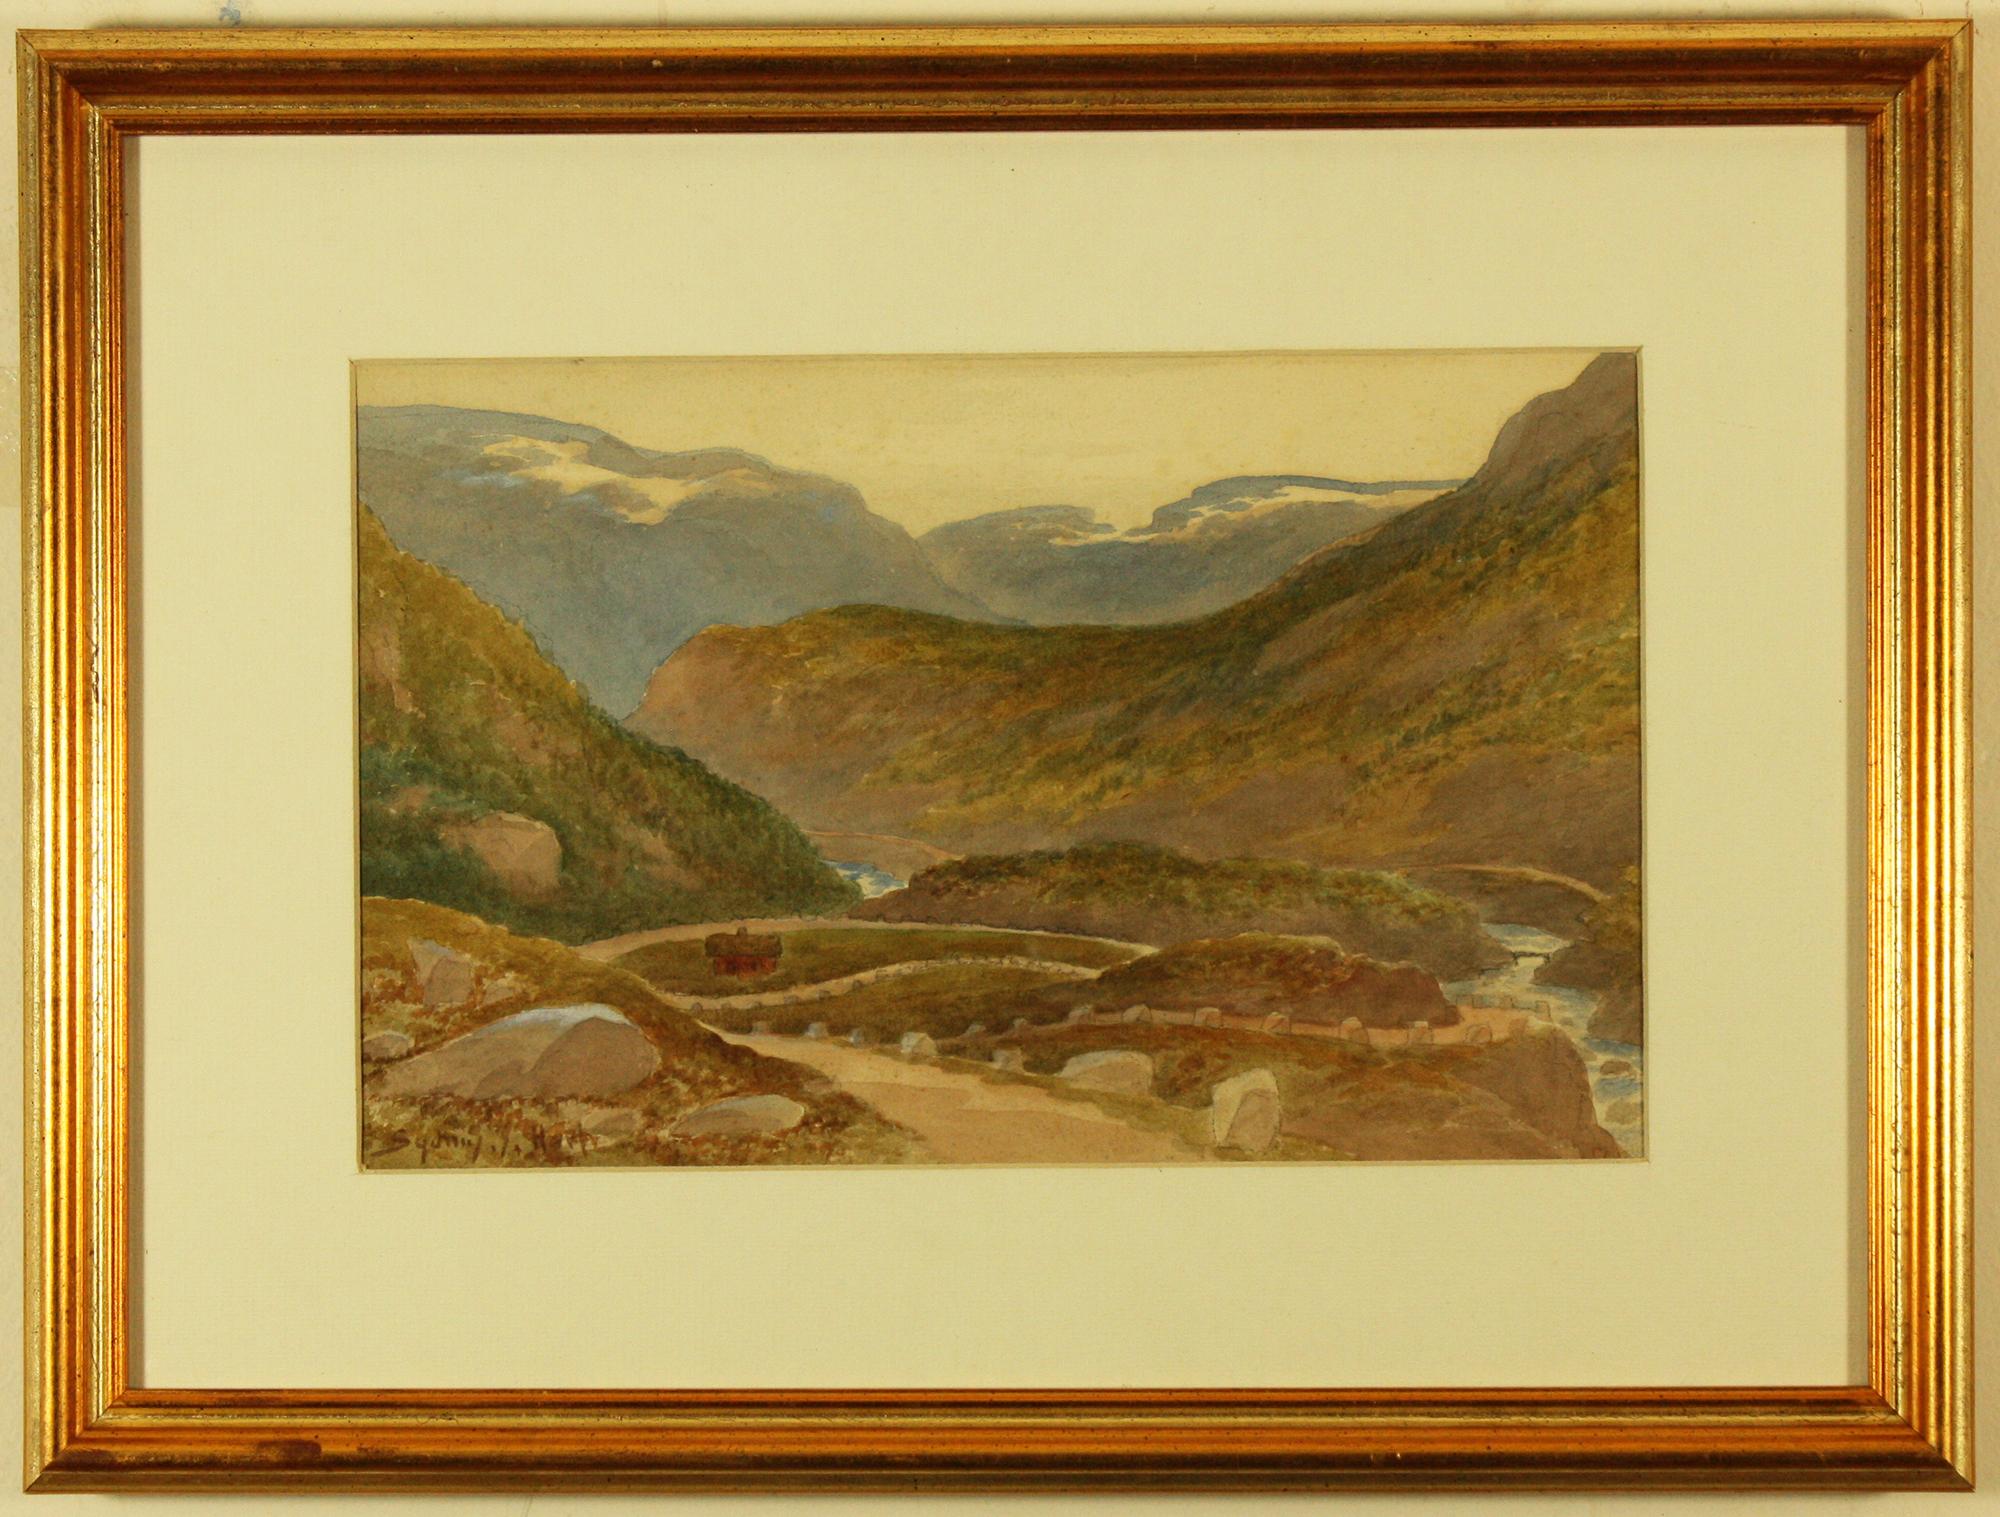 Odda Countryside by Sydney Ernest Hart
Watercolour
Image Size  6.25 ins by 10 ins
Overall Frame Size  11.5 ins by 15.5 ins

Sydney Ernest Hart
Born 1867 The Lizard, Cornwall. Died 1921 Bergen, Norway
Sydney was the 4th child of Thomas Hart the